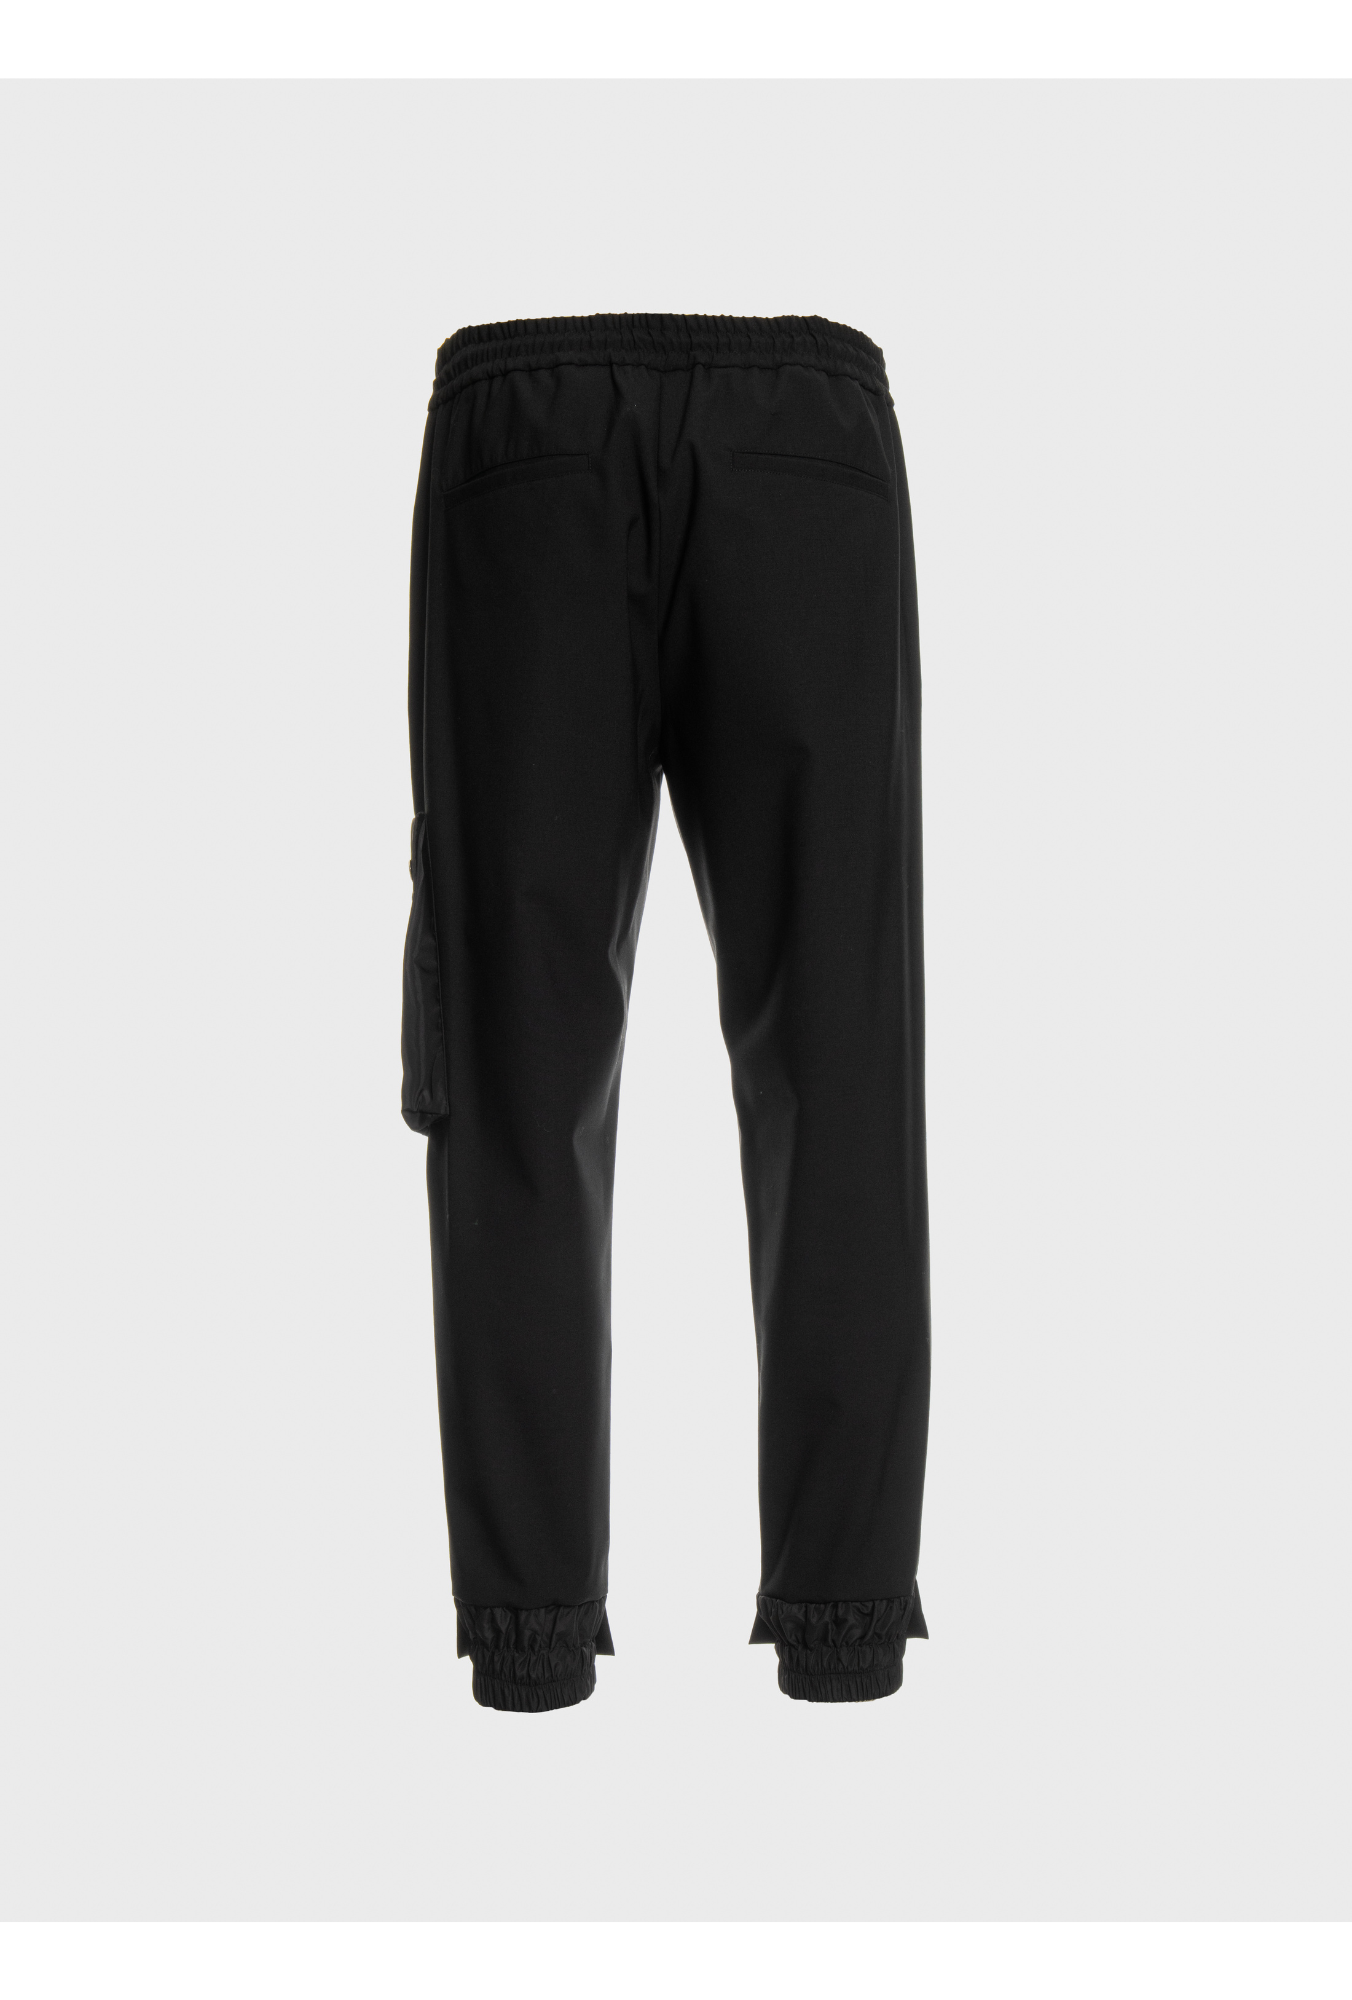 Comfy classic pants with one pocket